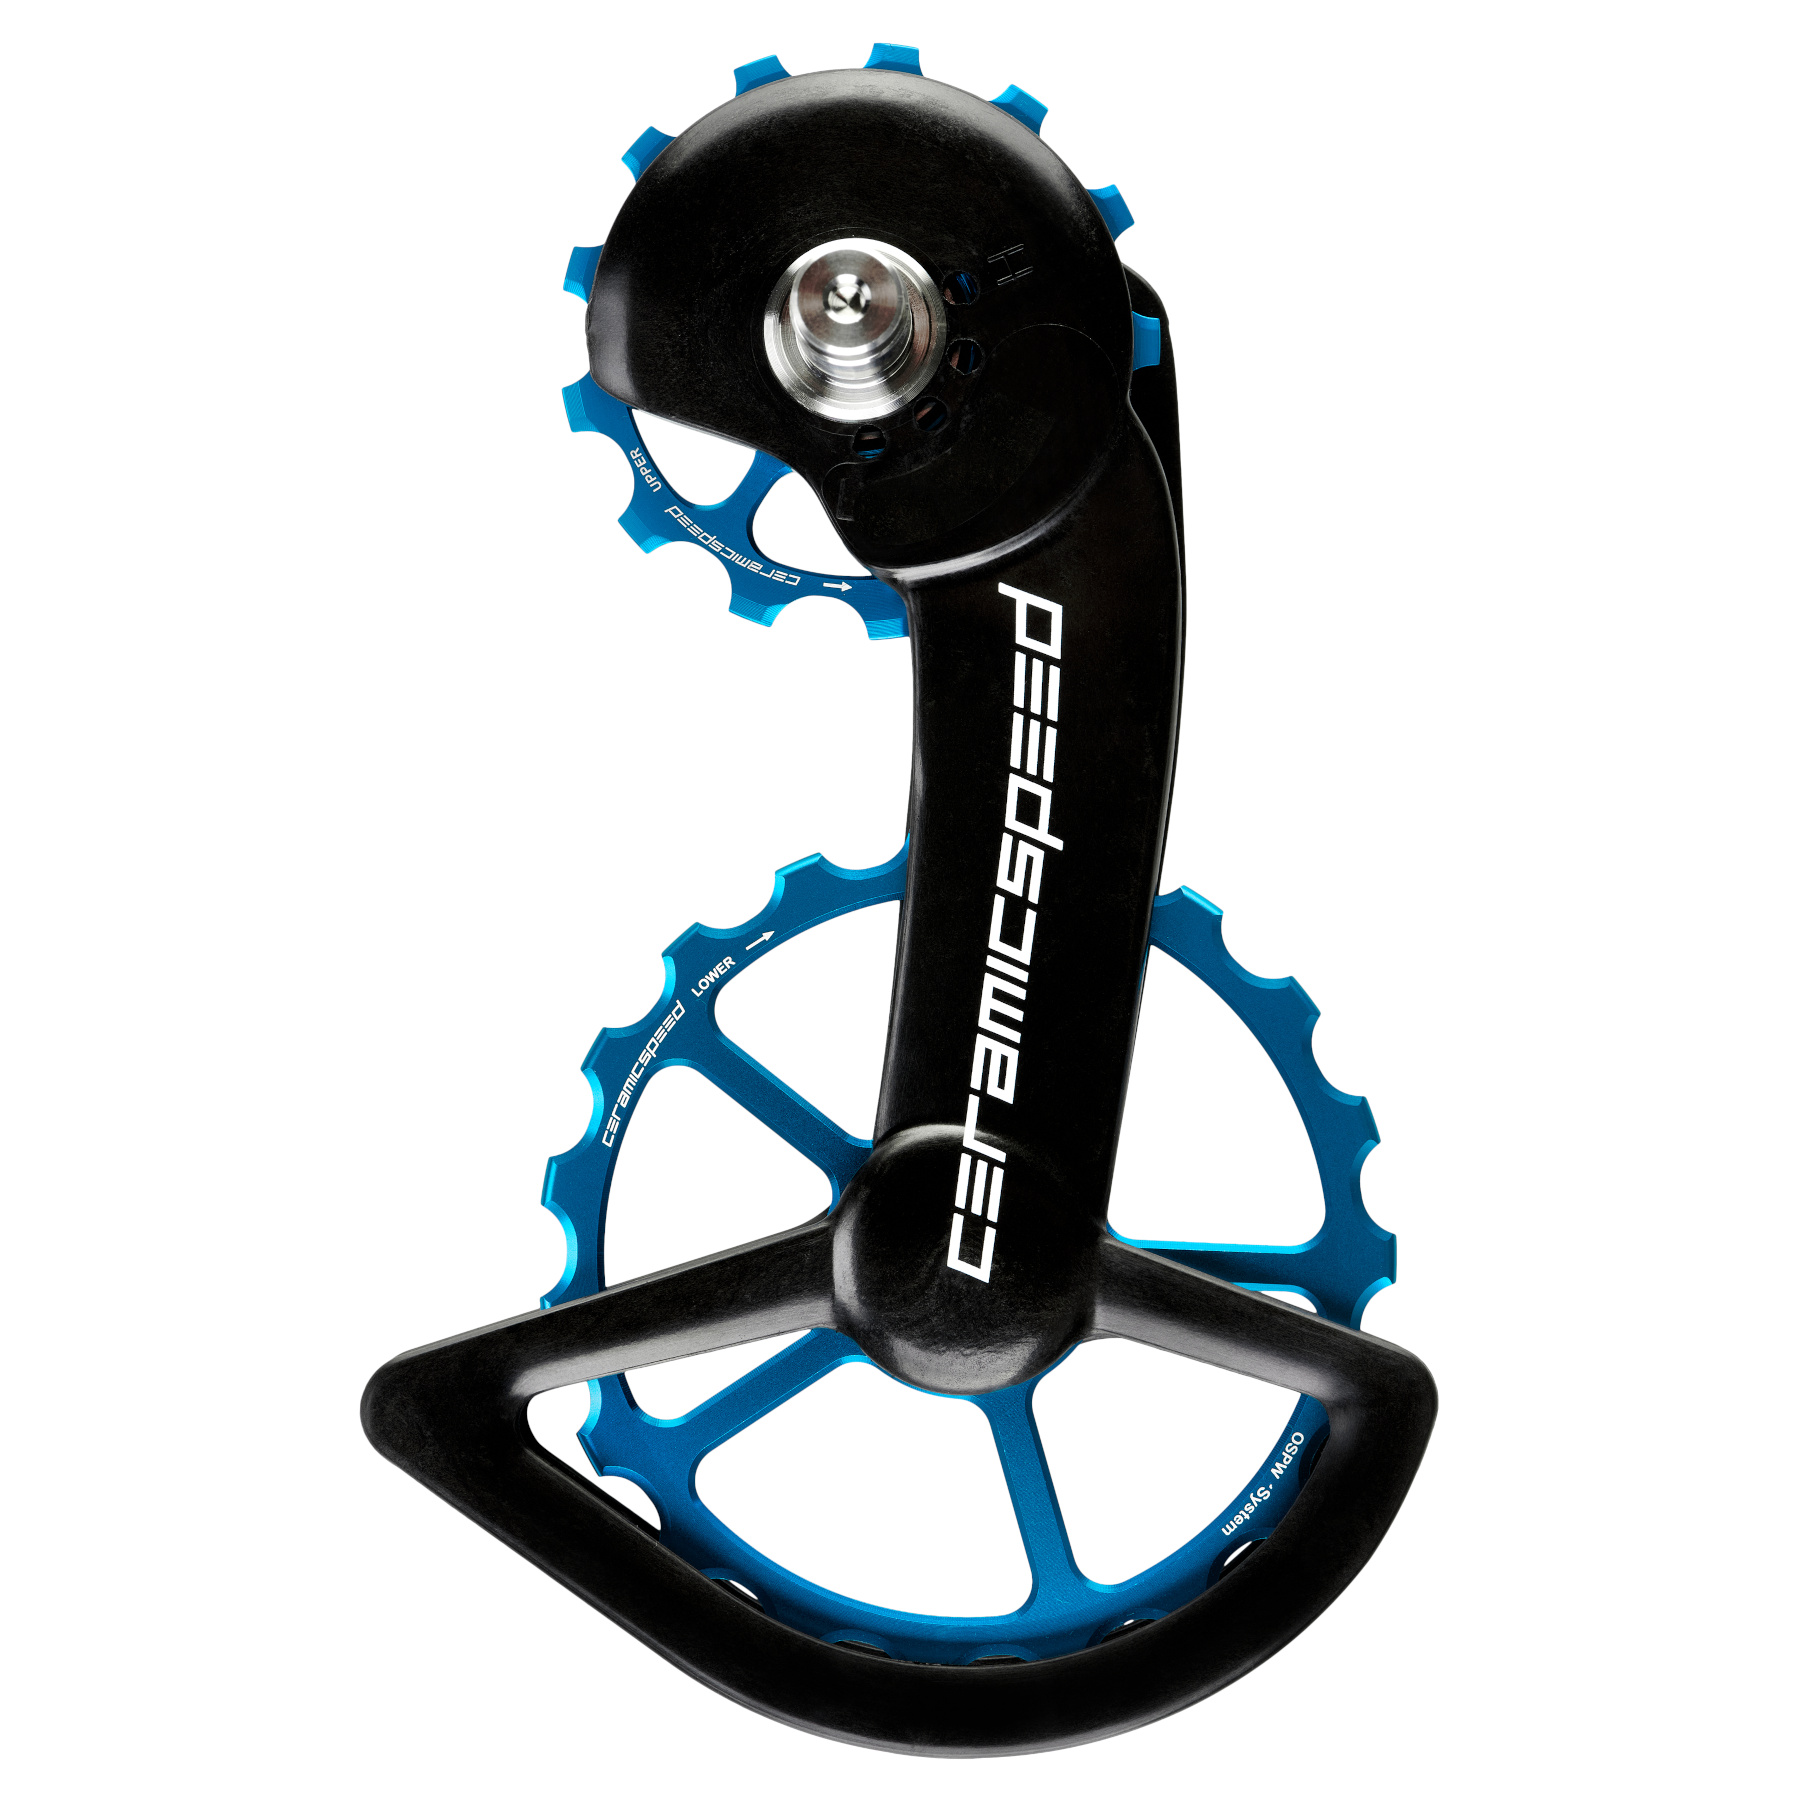 Image of CeramicSpeed OSPW Derailleur Pulley System - for Shimano R9100/R8000 (11s) | 13/19 Teeth | Coated Bearings - blue